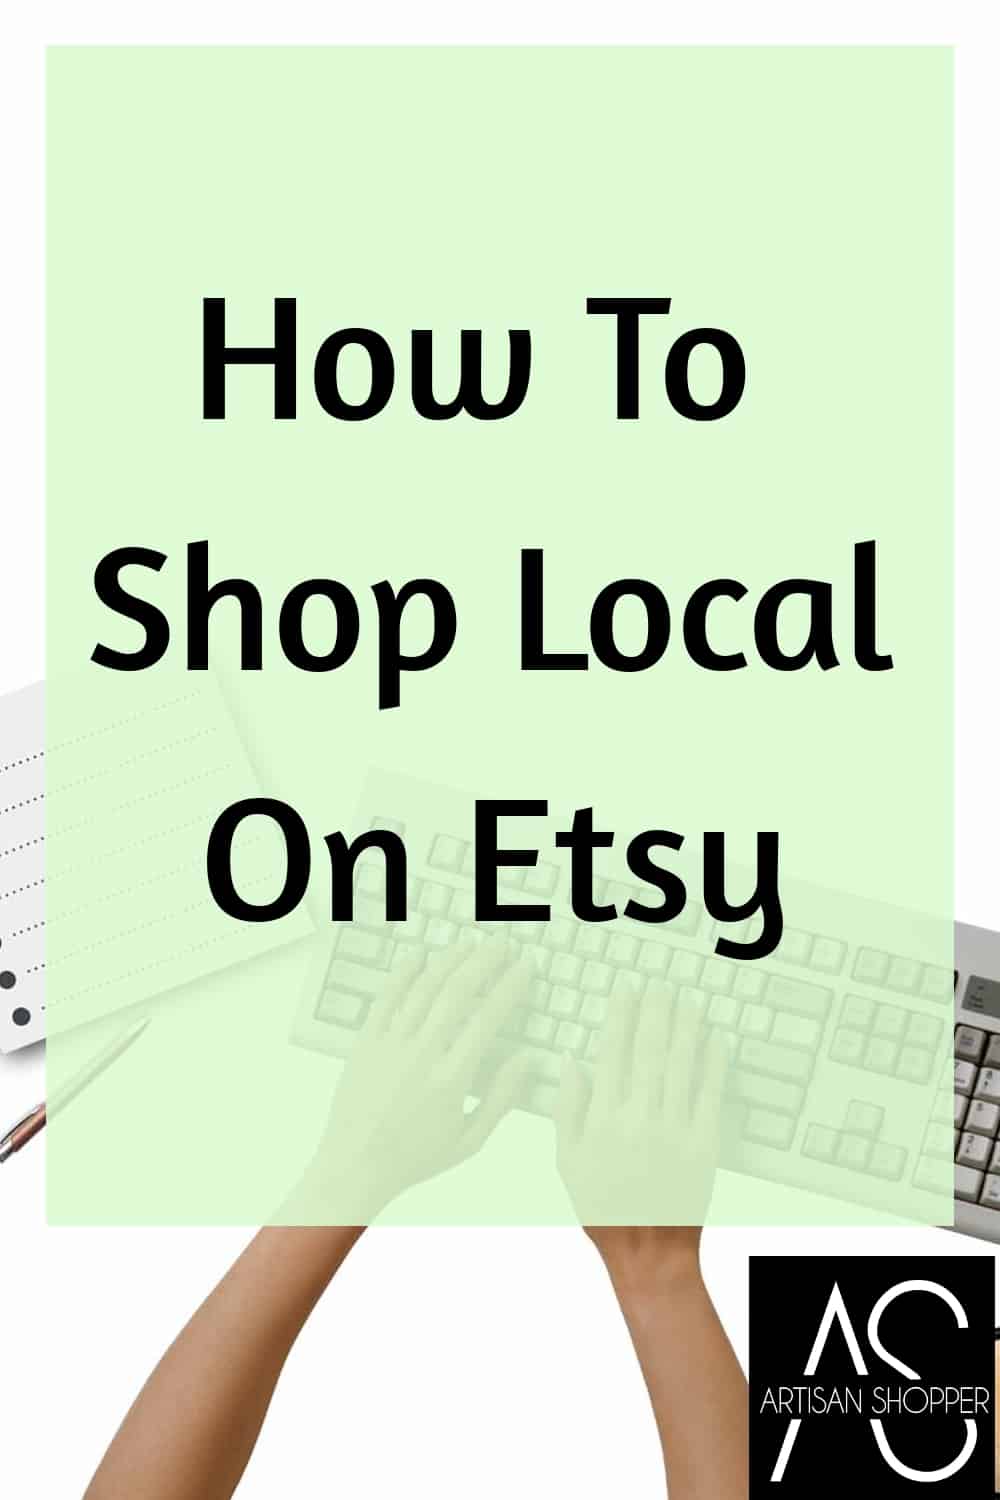 how-to-shop-local-on-etsy-artisan-shopper